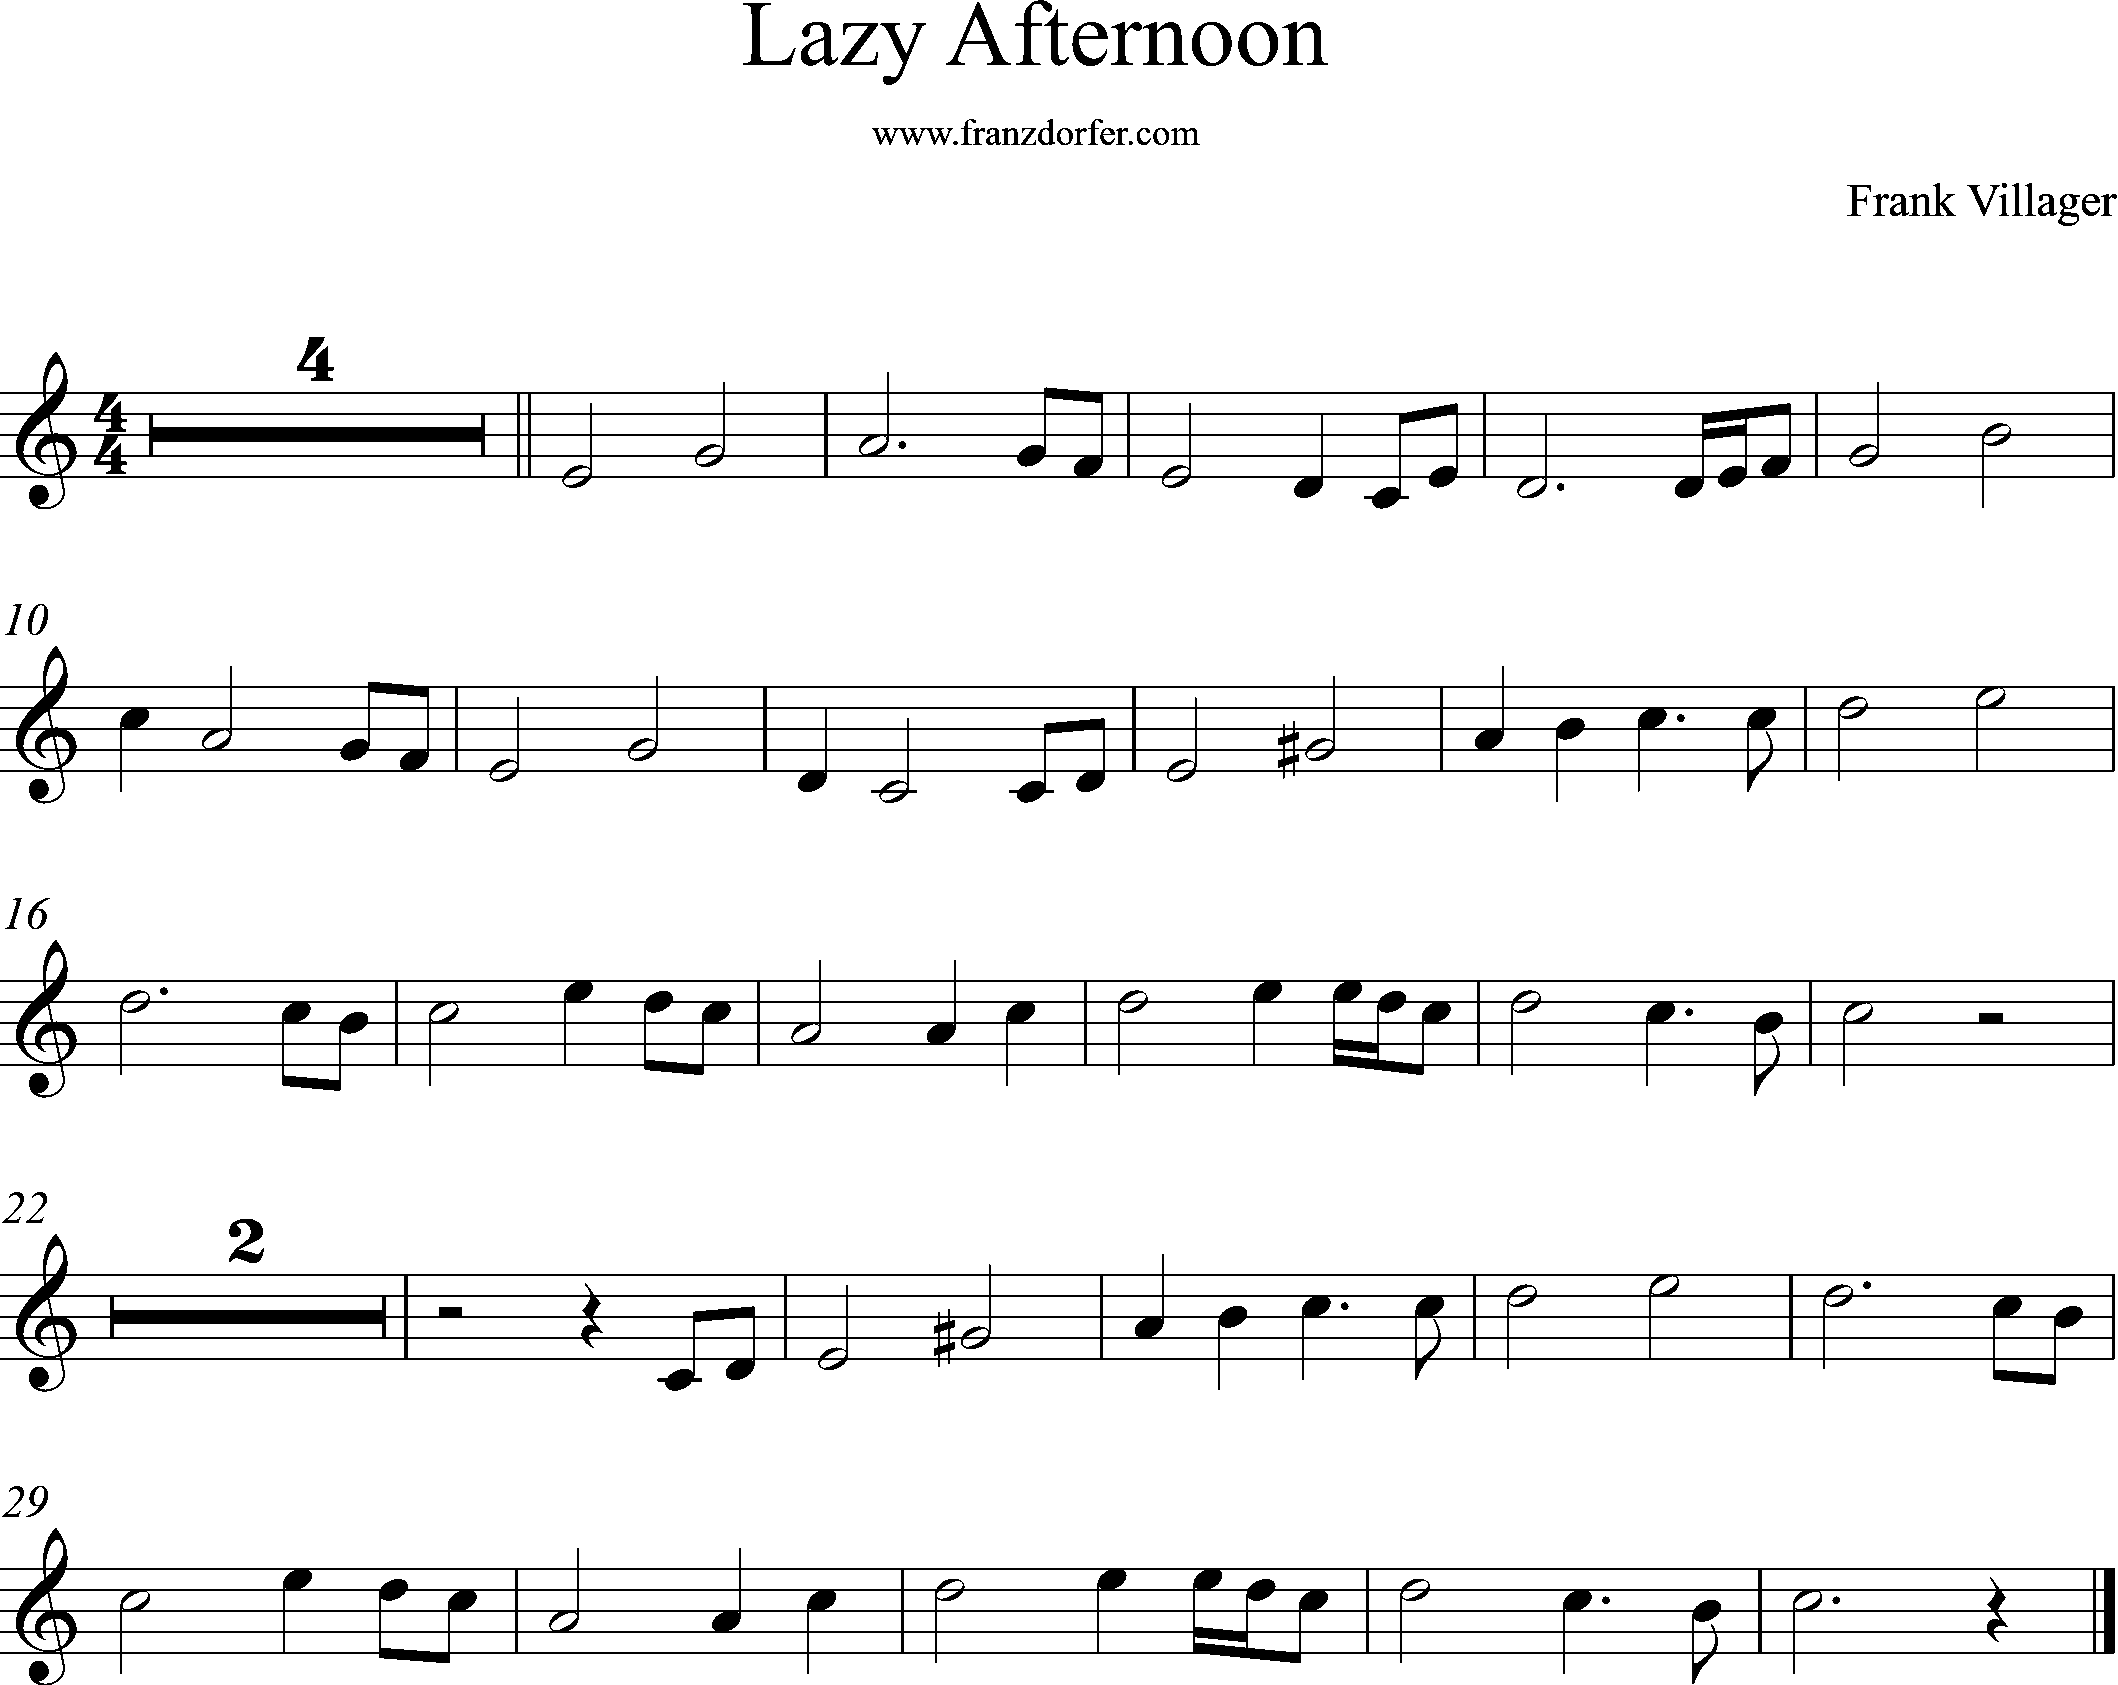 Lazy Afternoon, Music for Violin and Piano